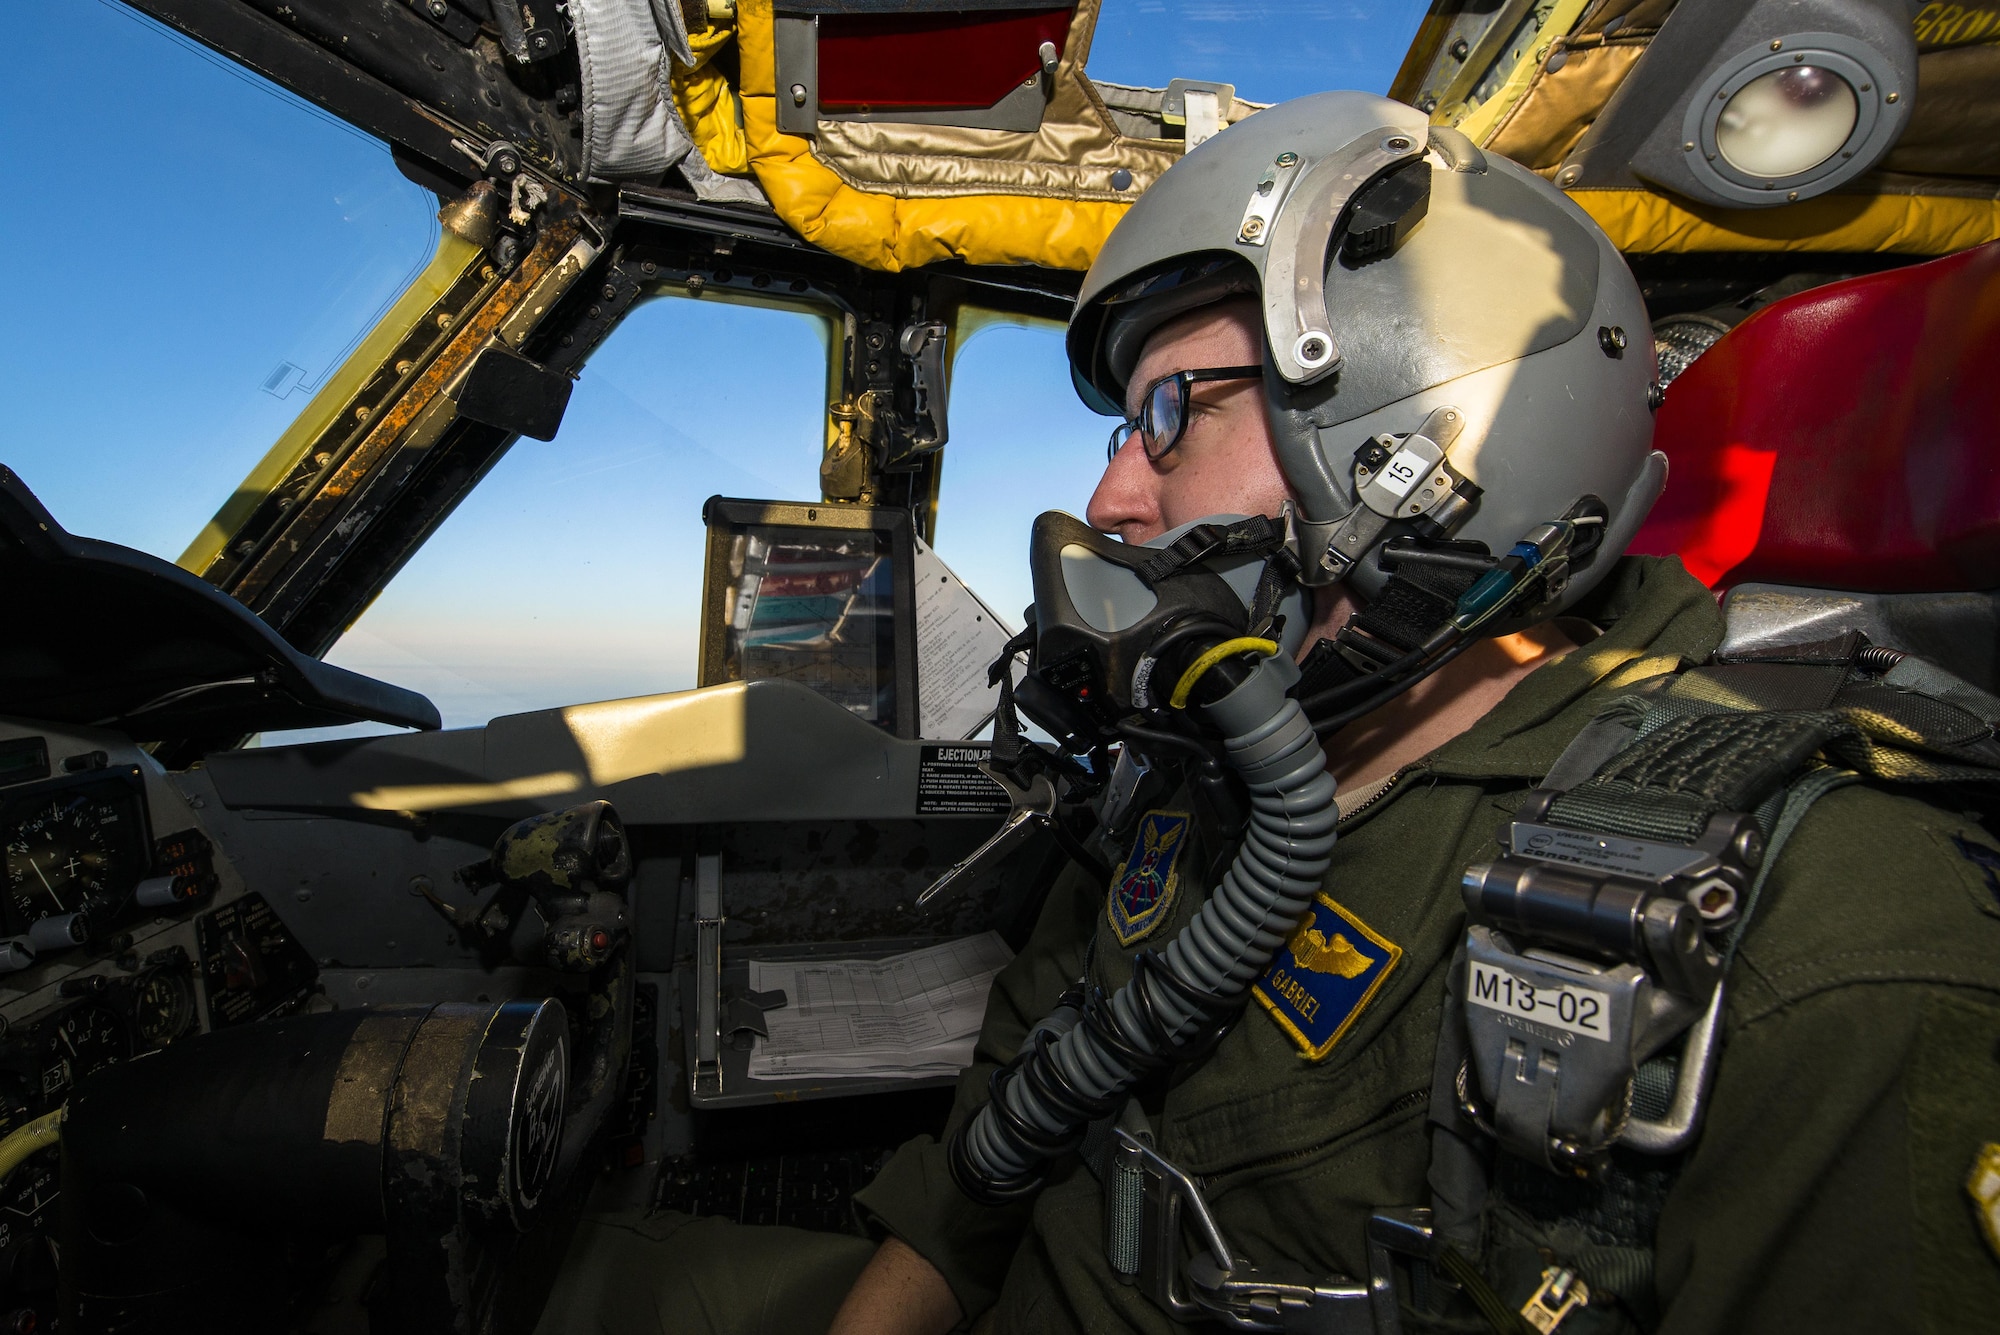 Capt. Jonathan Gabriel, 23rd Bomb Squadron aircraft commander, pilots a B-52H Stratofortress above the clouds of North Dakota, Jan. 31, 2017. Gabriel and Capt. Dane Weathers, 23rd BS aircraft commander, relied on their offensive and defensive team to successfully complete their training mission. (U.S. Air Force photo/Senior Airman J.T. Armstrong)